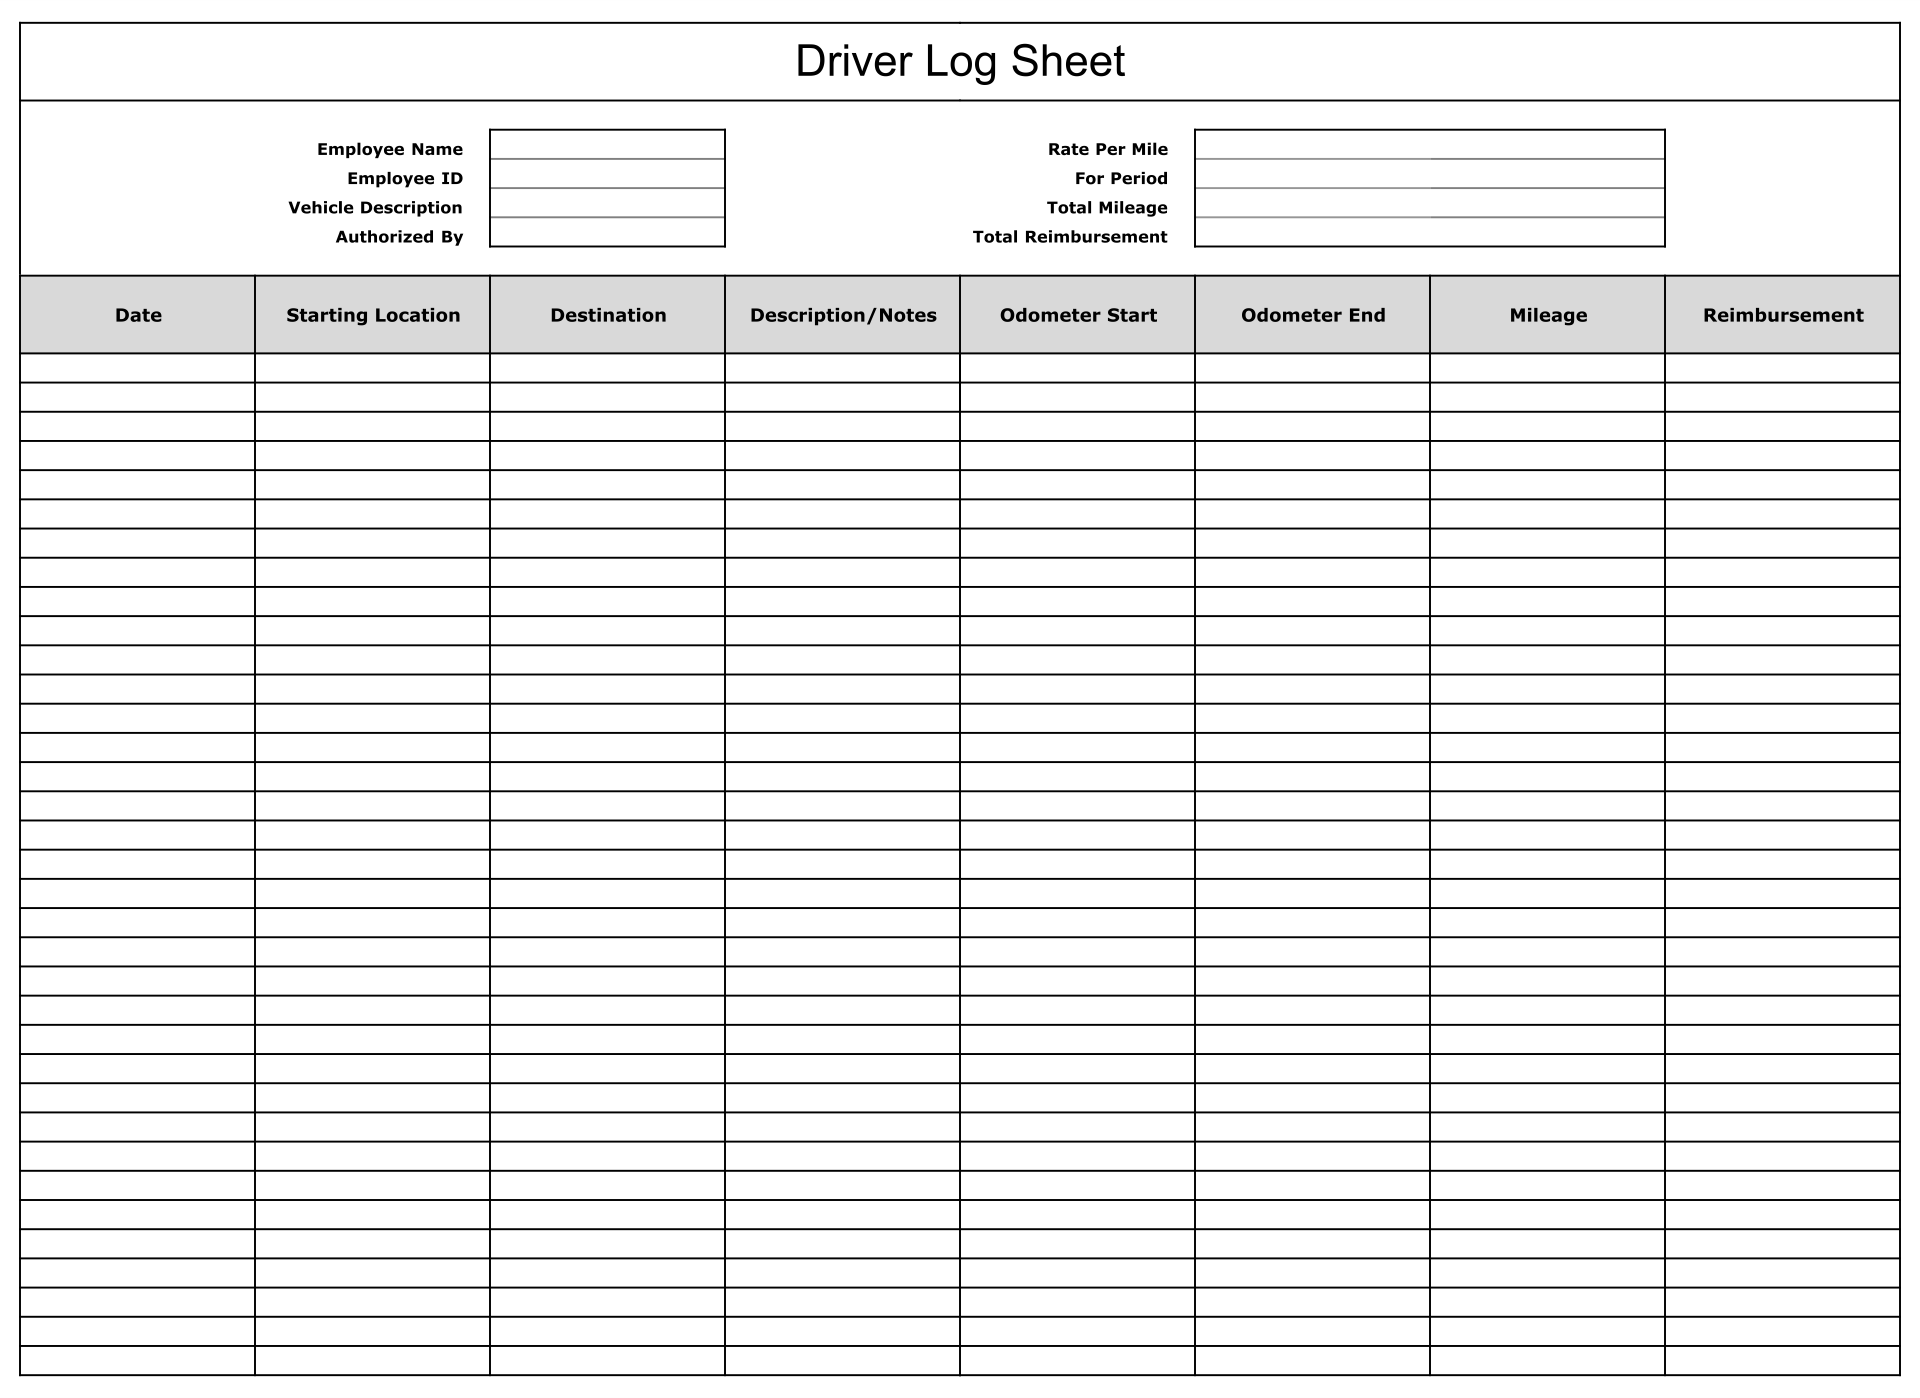 7 Best Images Of Free Printable Trip Sheets Driver Trip Log Sheet All